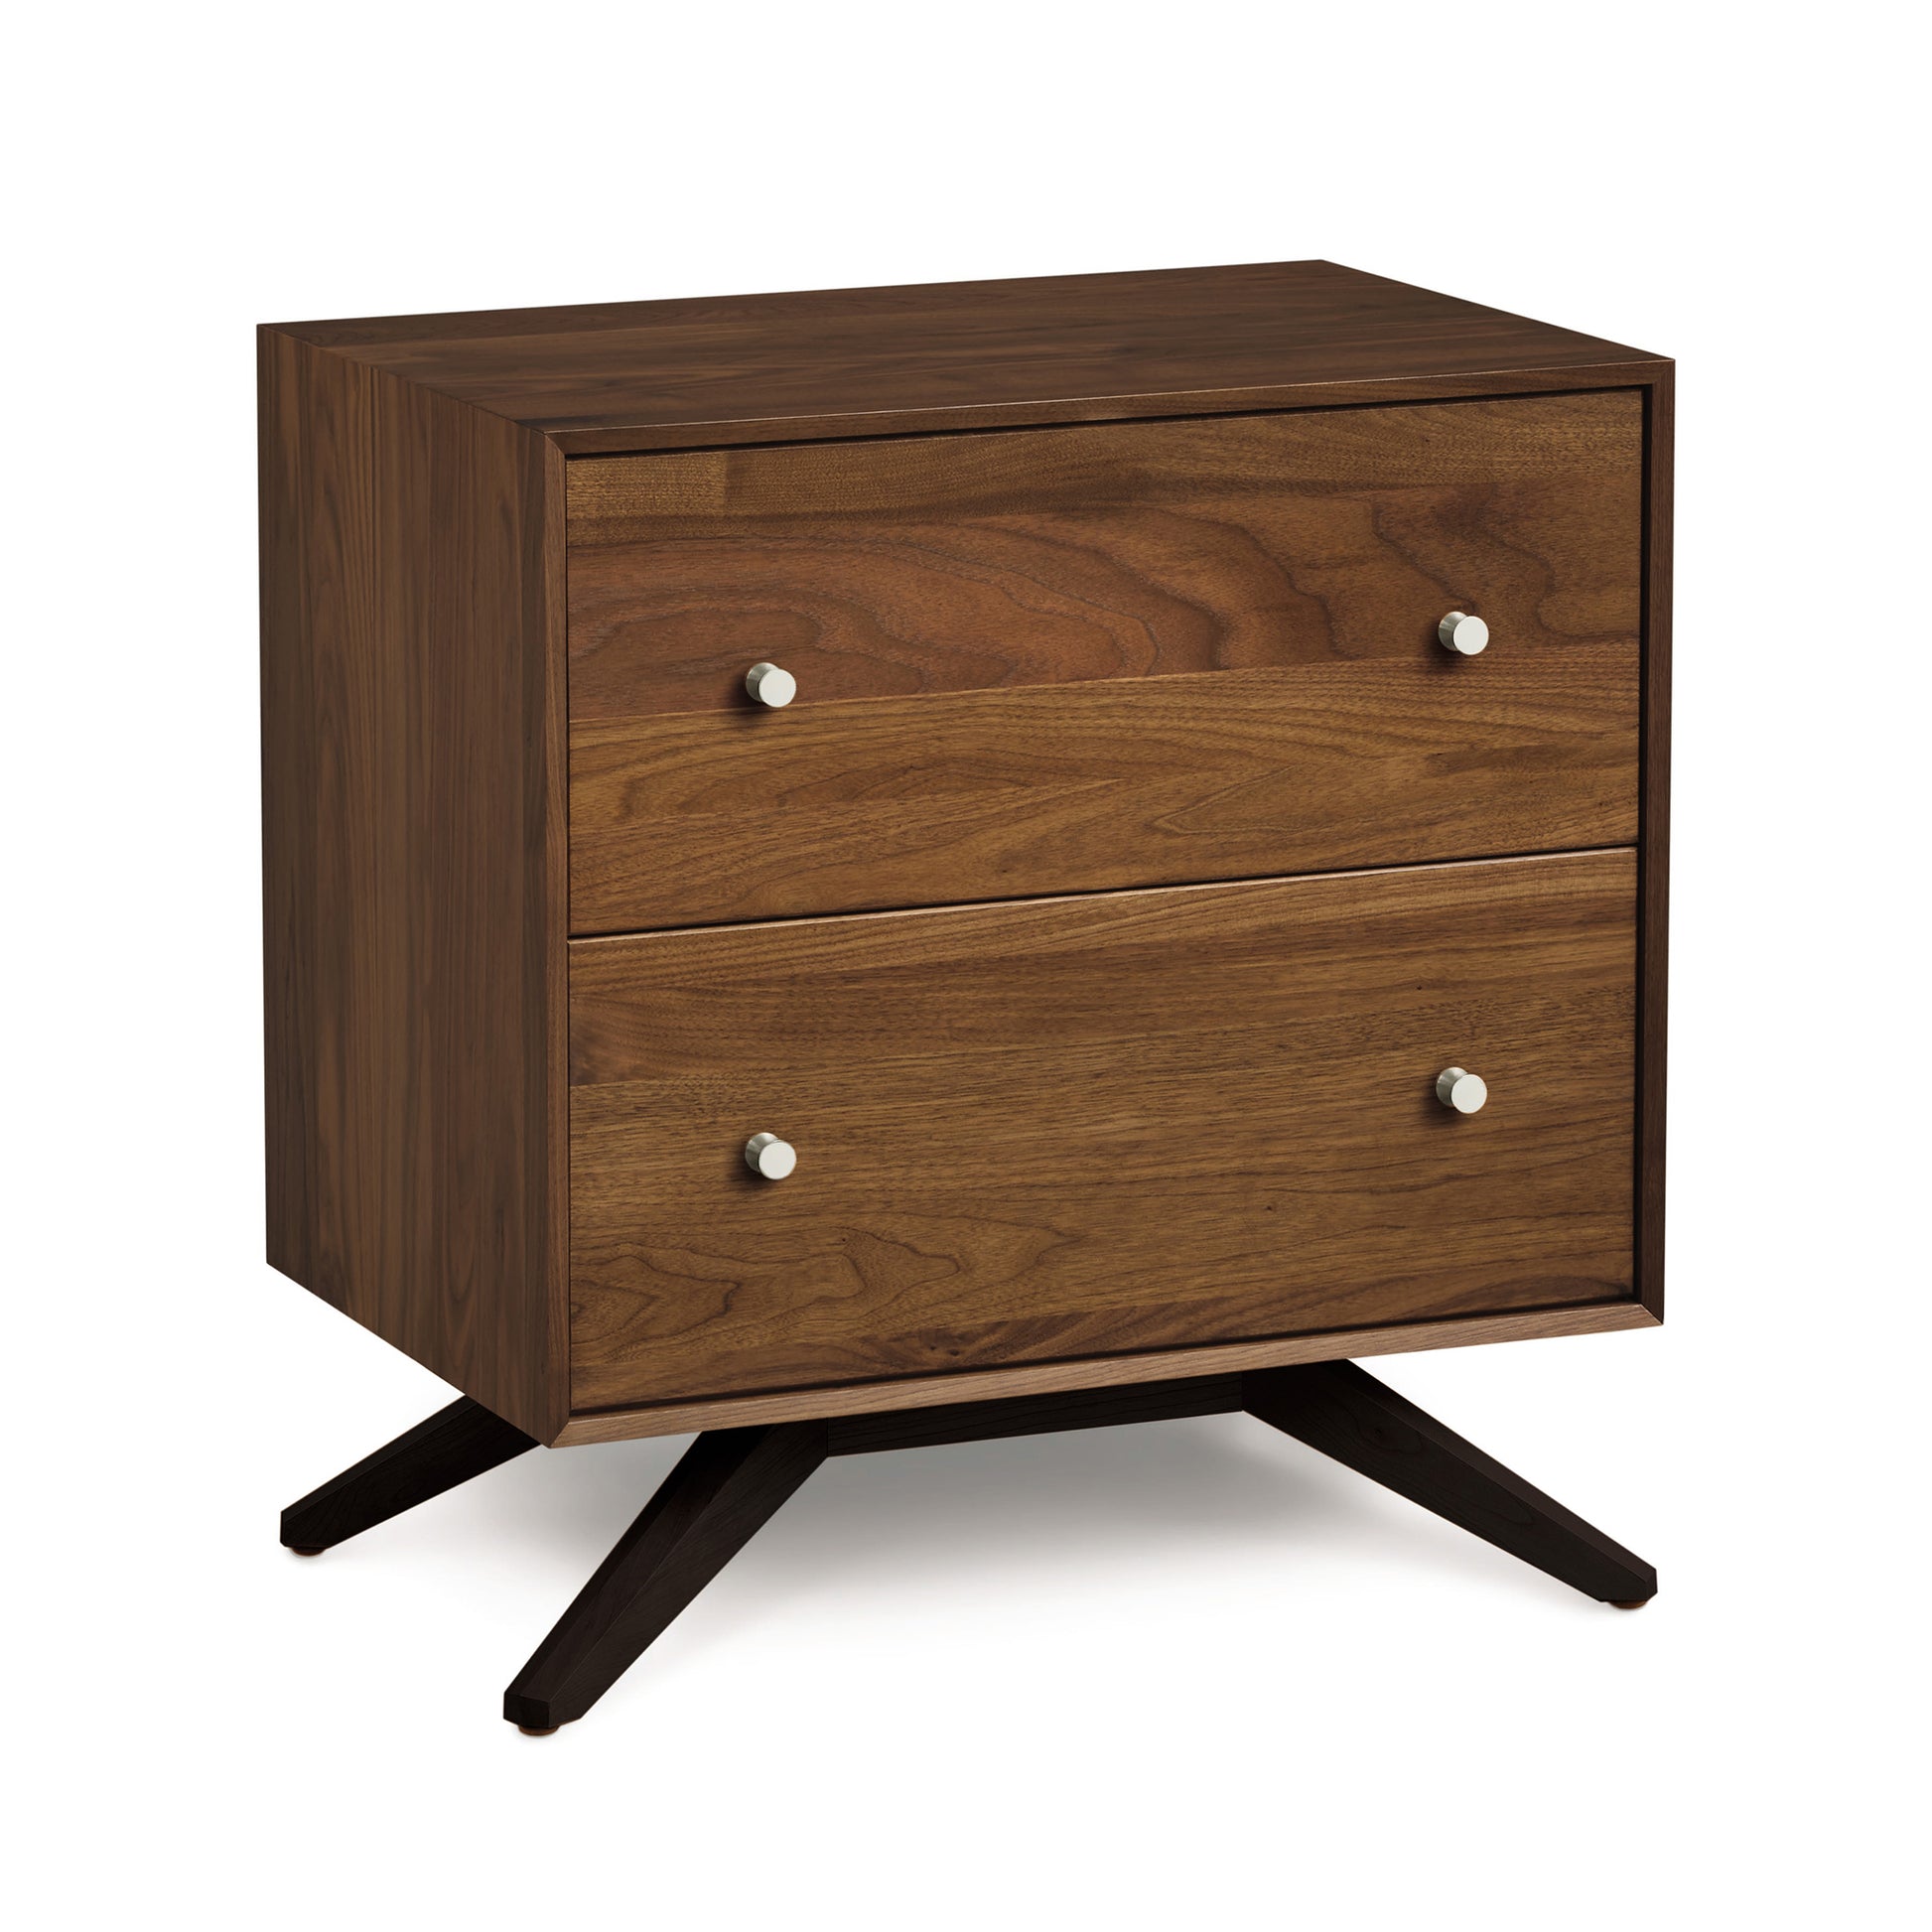 A modern wooden Astrid 2-drawer nightstand by Copeland Furniture with splayed black legs.